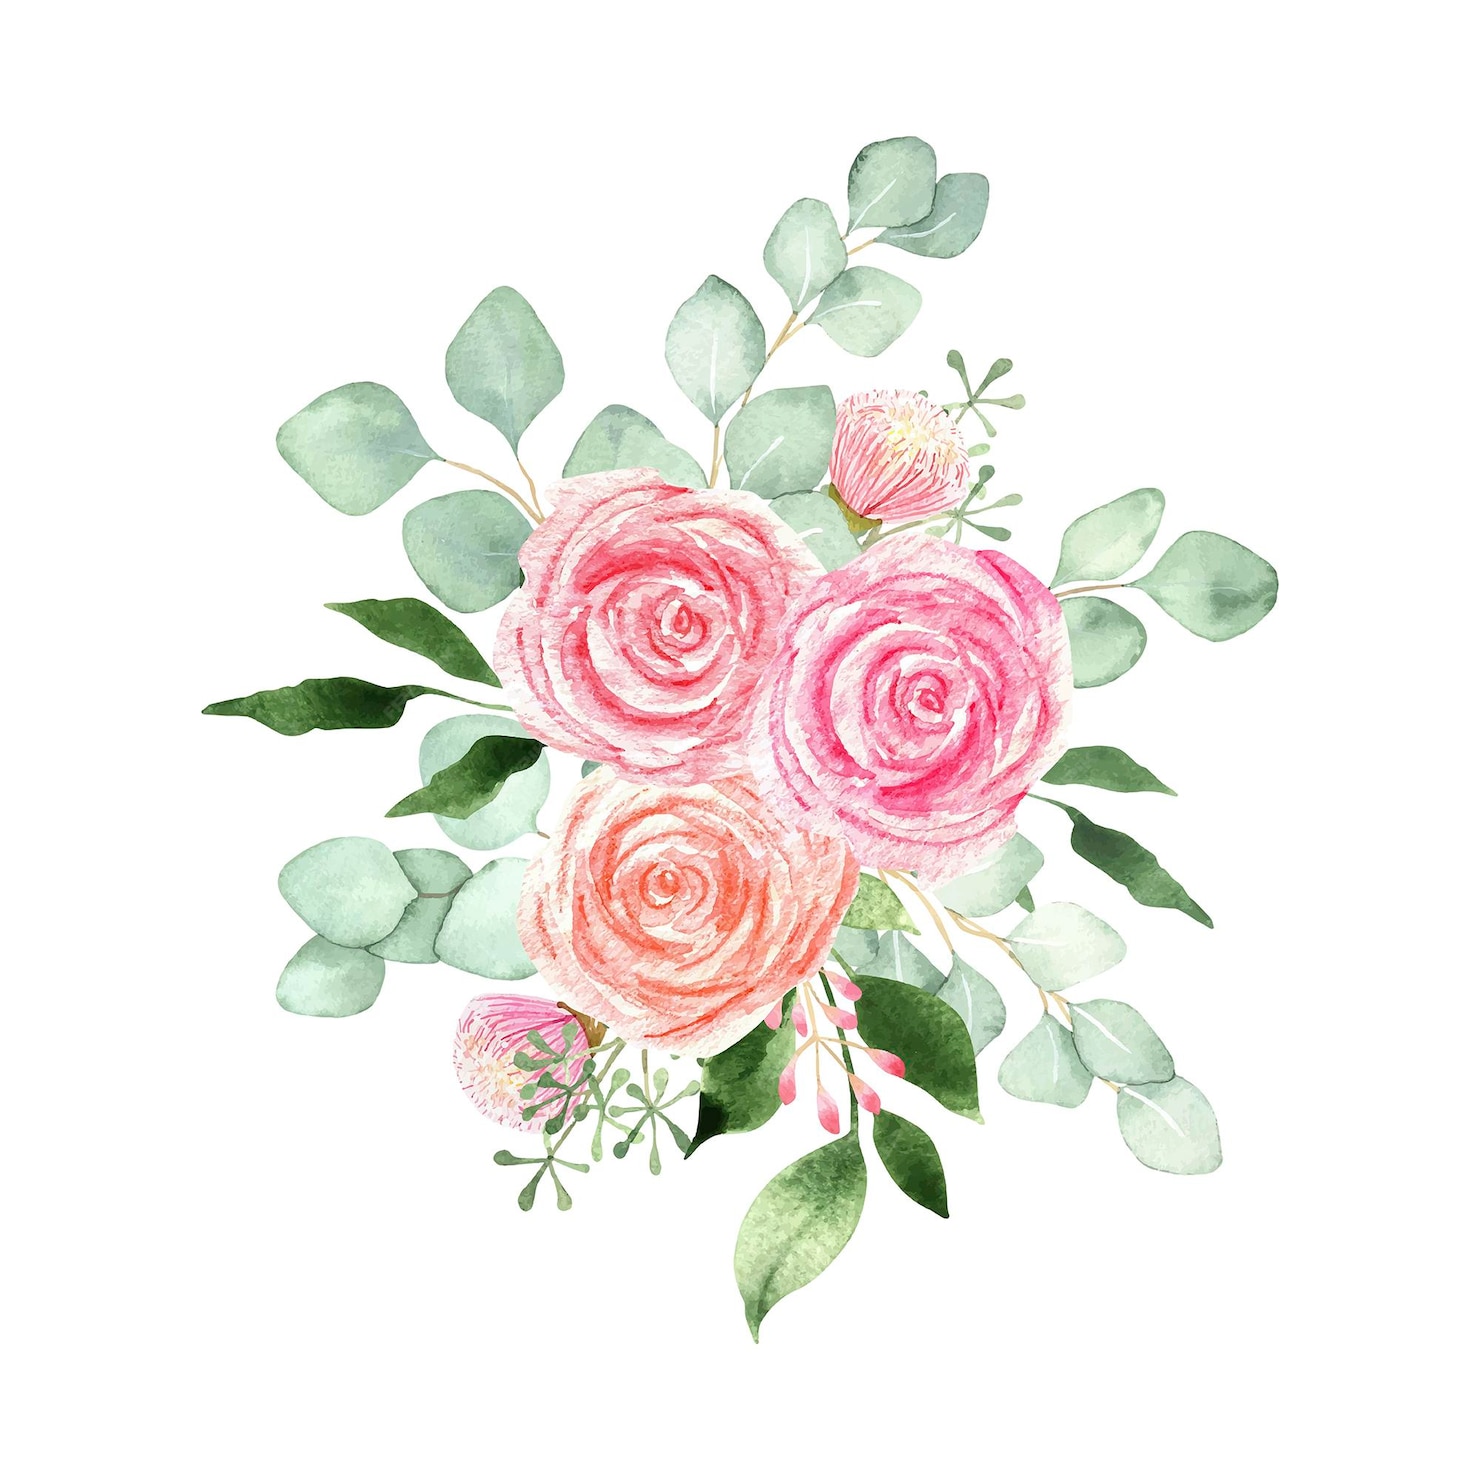 Premium Vector | Watercolor bouquet with pink roses and eucalyptus branches